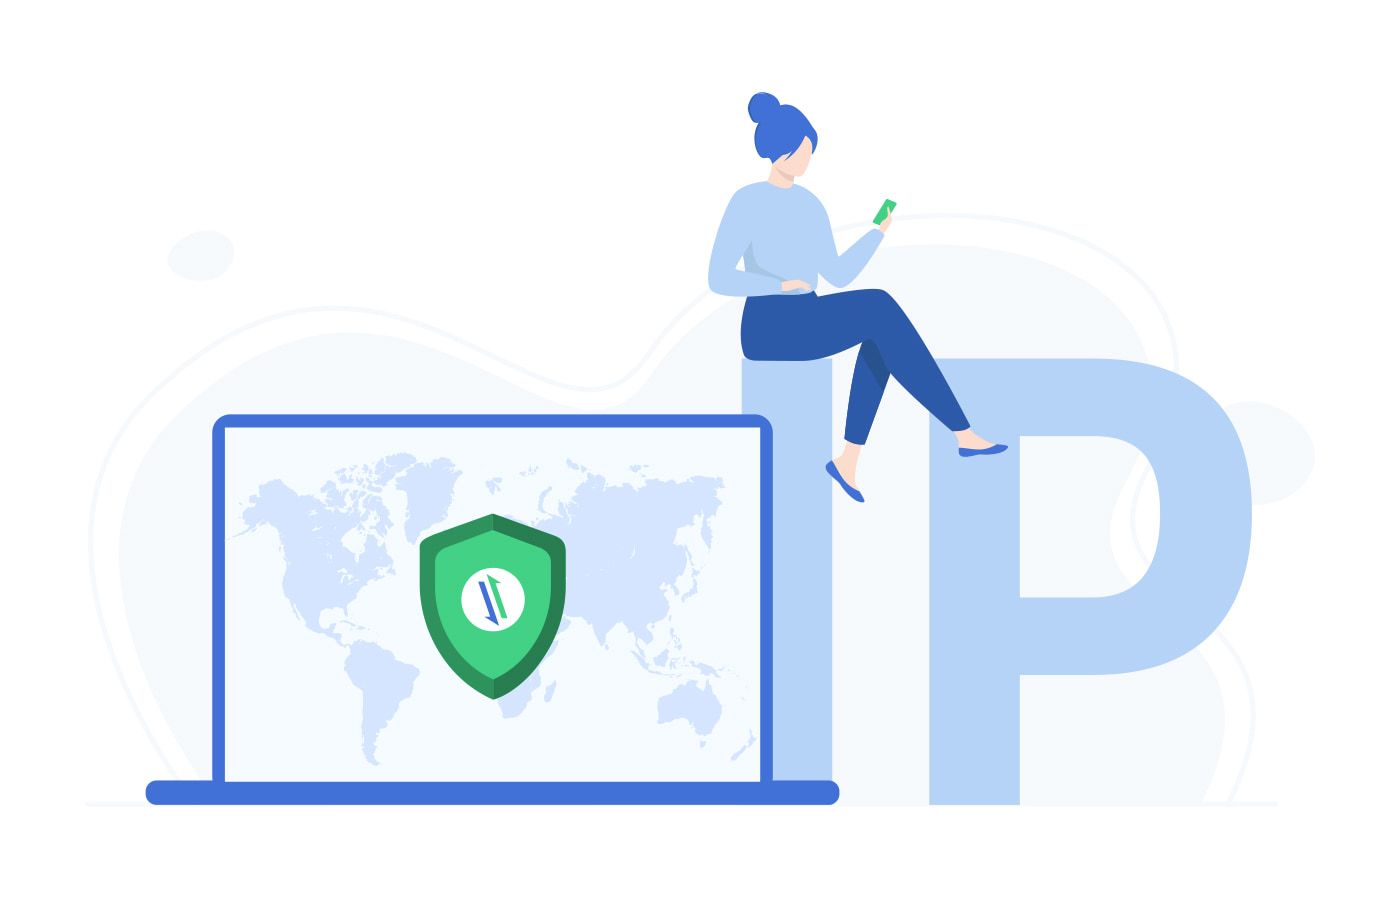 How To Change Your Location And IP With A VPN In 2022